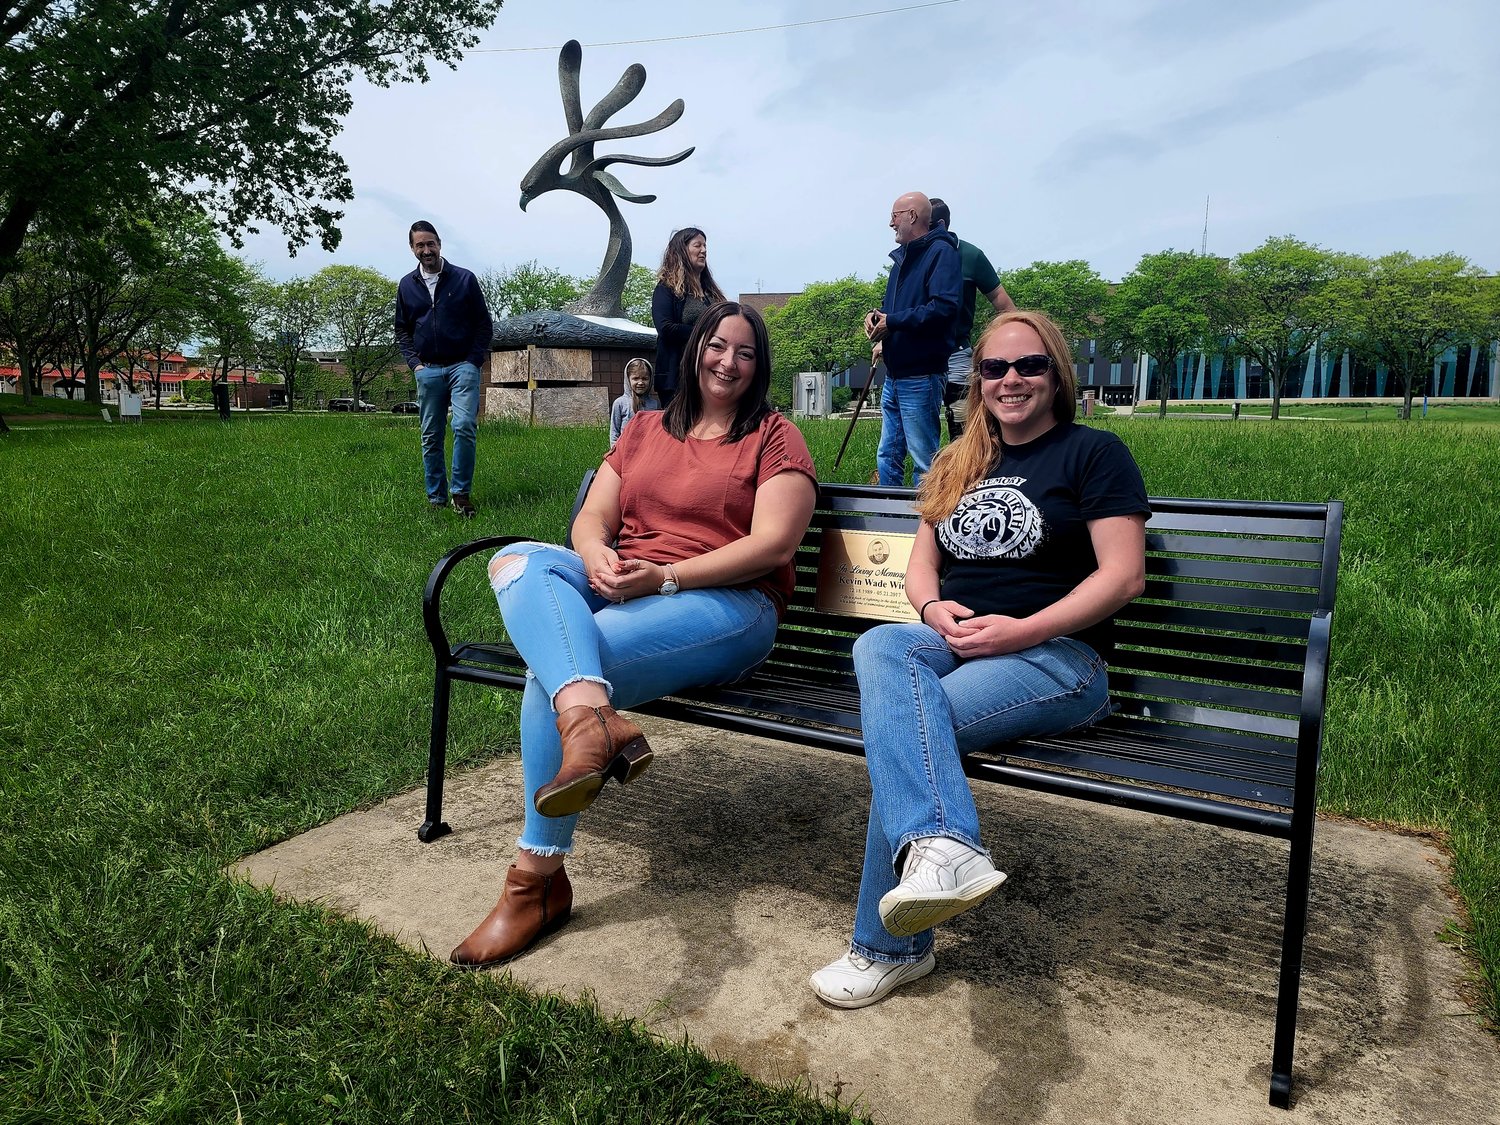 Christin Johnson and Michelle Paye sit on the bench they helped secure for the plaque remembering their murdered friend, Kevin Wirth.